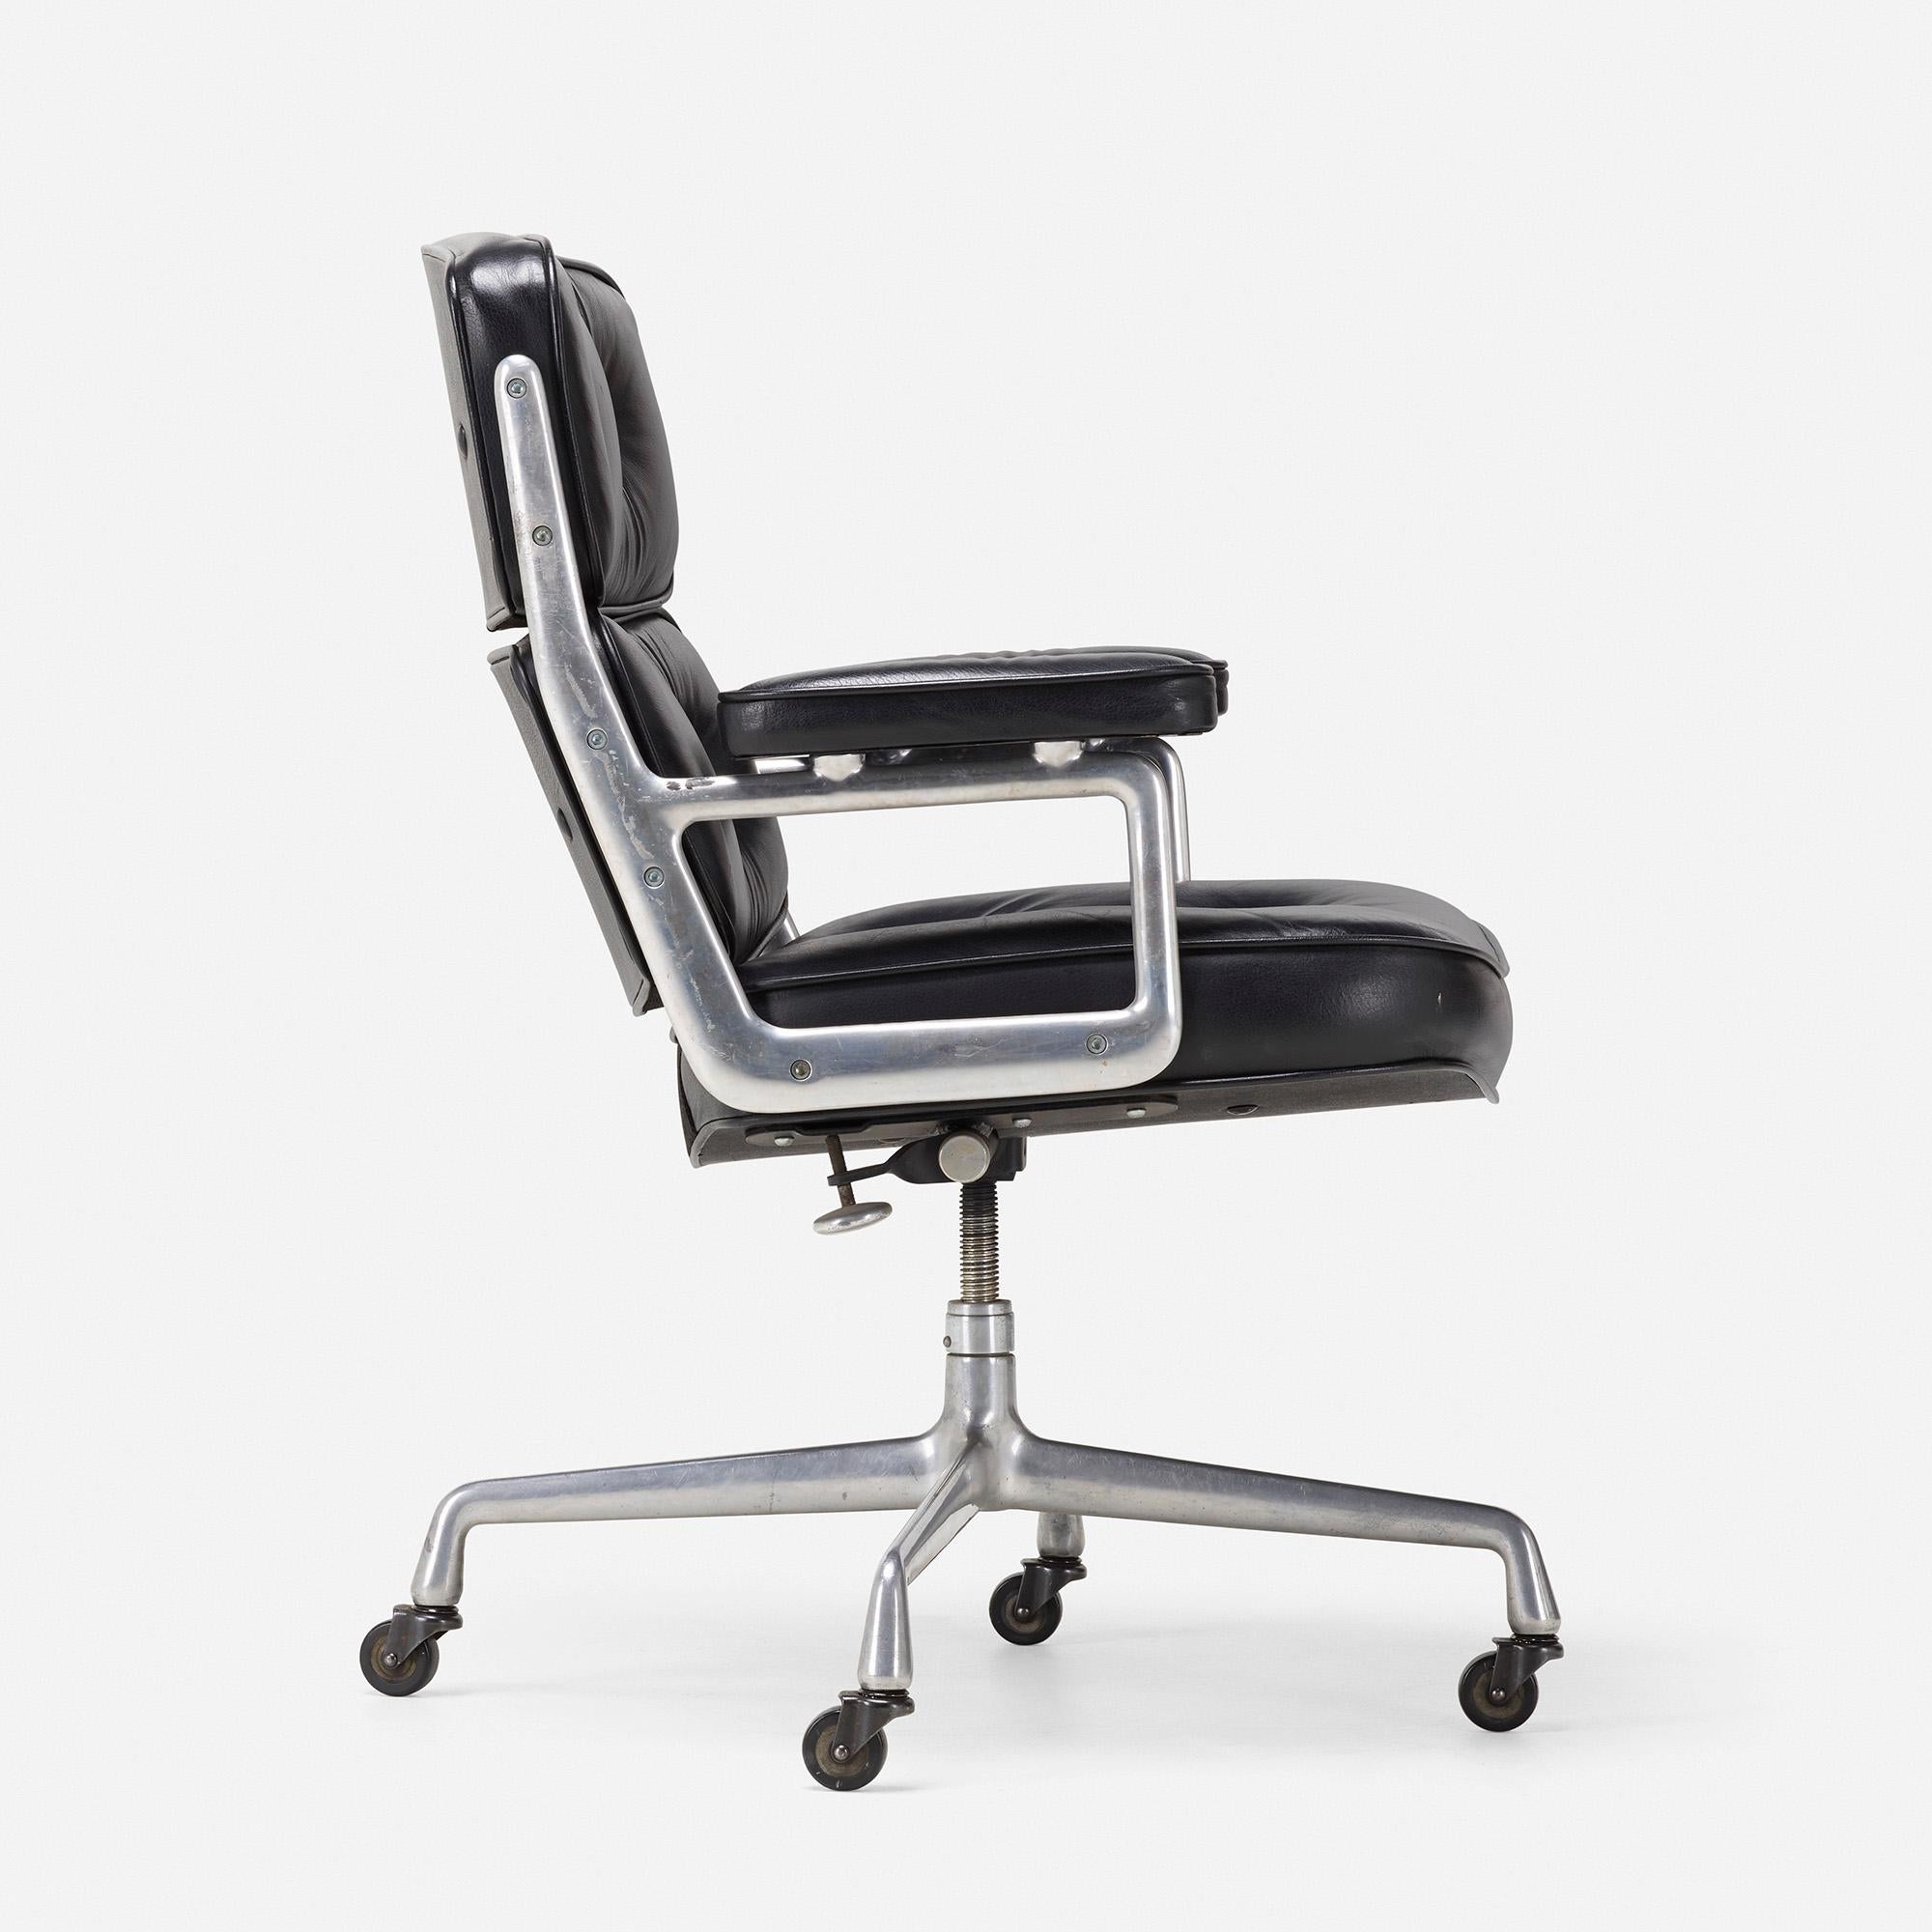 Made by: Herman Miller, USA, 1960 / c. 1990

Material: leather, aluminum, casters

Size: 27 W × 26.5 D × 37 H in

Description: Manufacturer's label to underside ‘Herman Miller’.